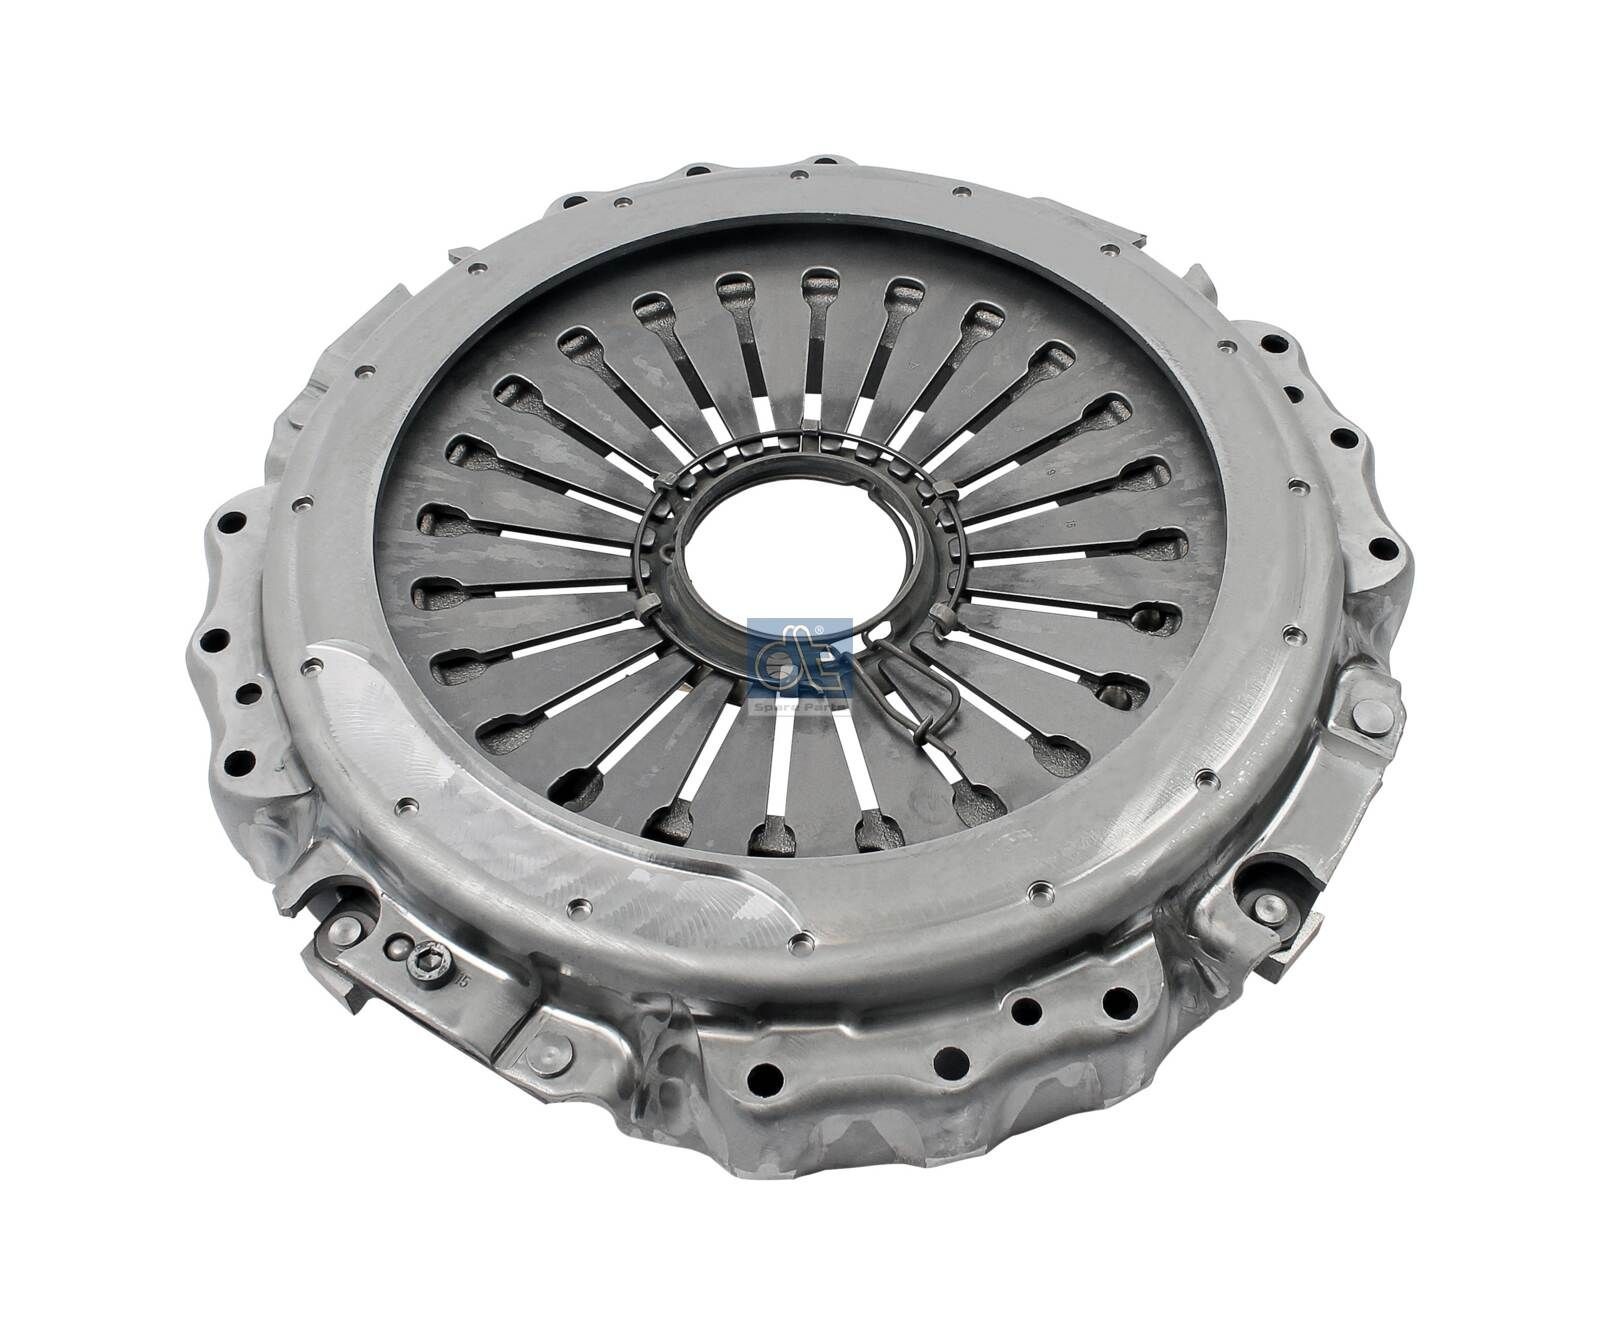 3482 000 042 DT Spare Parts 3.40133 Clutch Pressure Plate 007 250 95 04